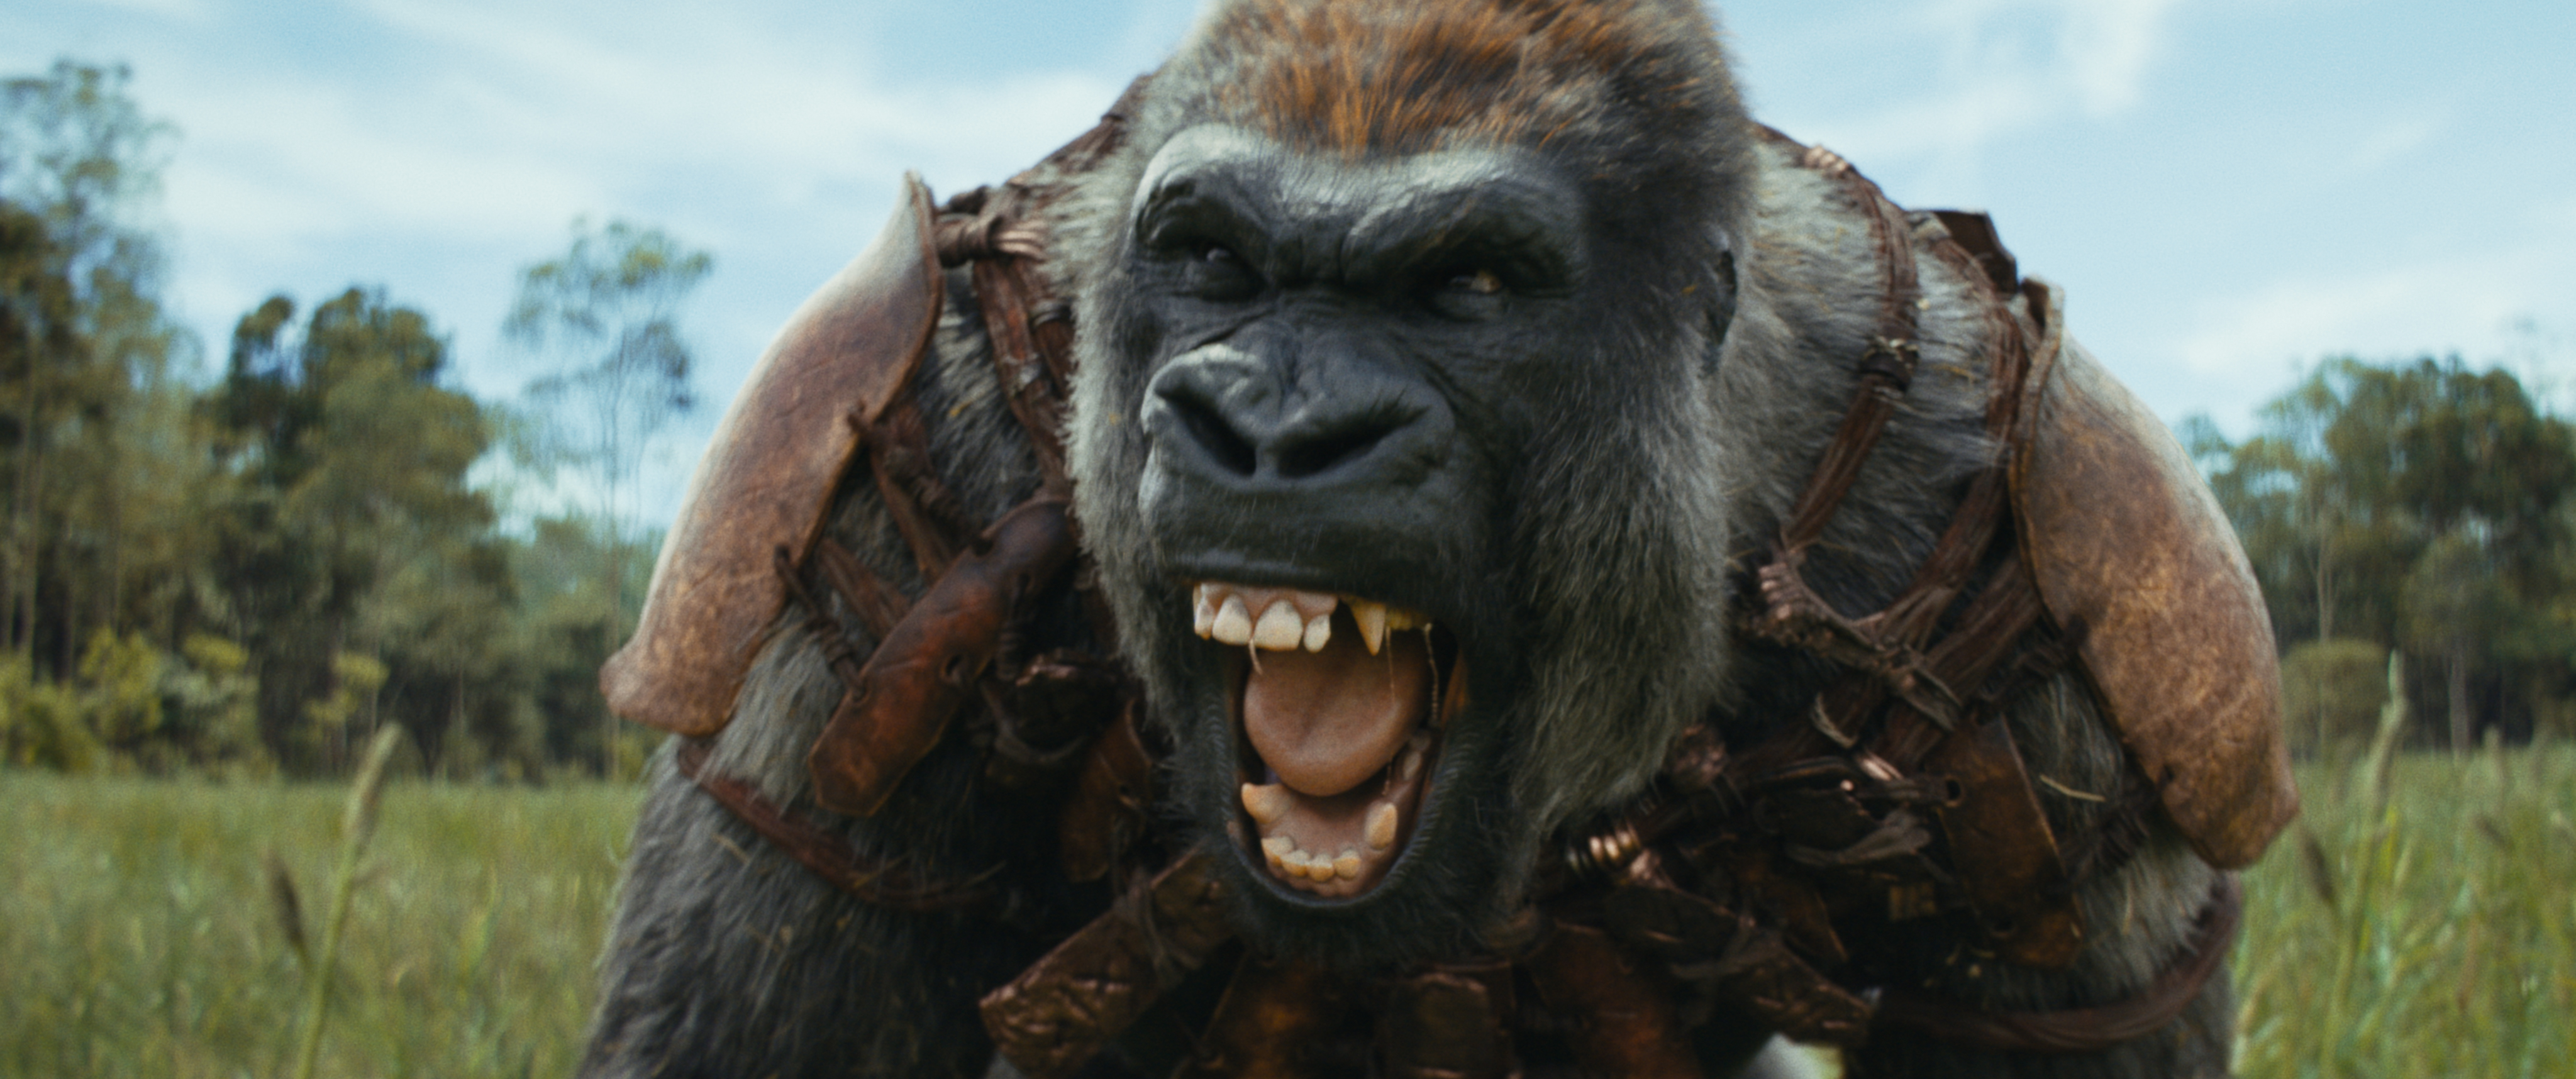 A gorilla from Kingdom of the Planet of the Apes snarls at the camera